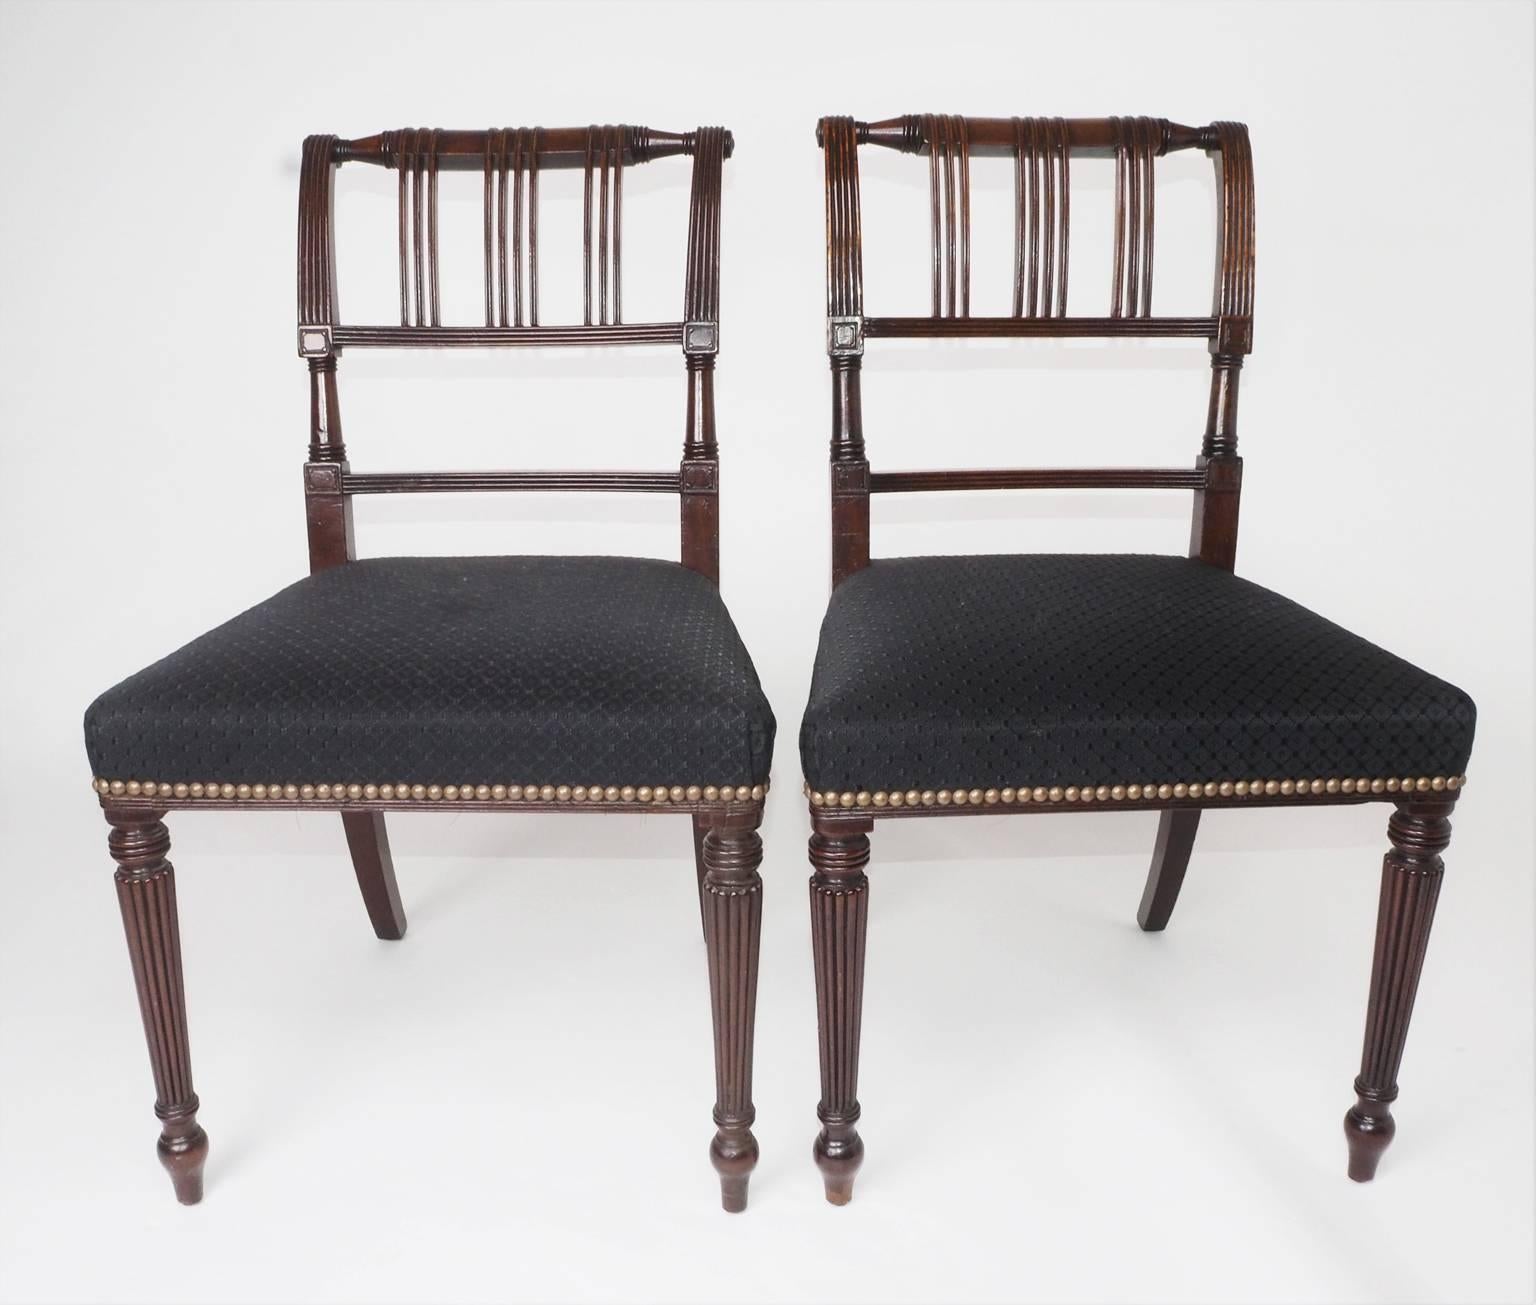 Pair of fine quality mahogany chairs with later horse hair upholstery, by Gillows. The design of these chairs closely relates to the 'Denison' pattern which was introduced in 1802. See 